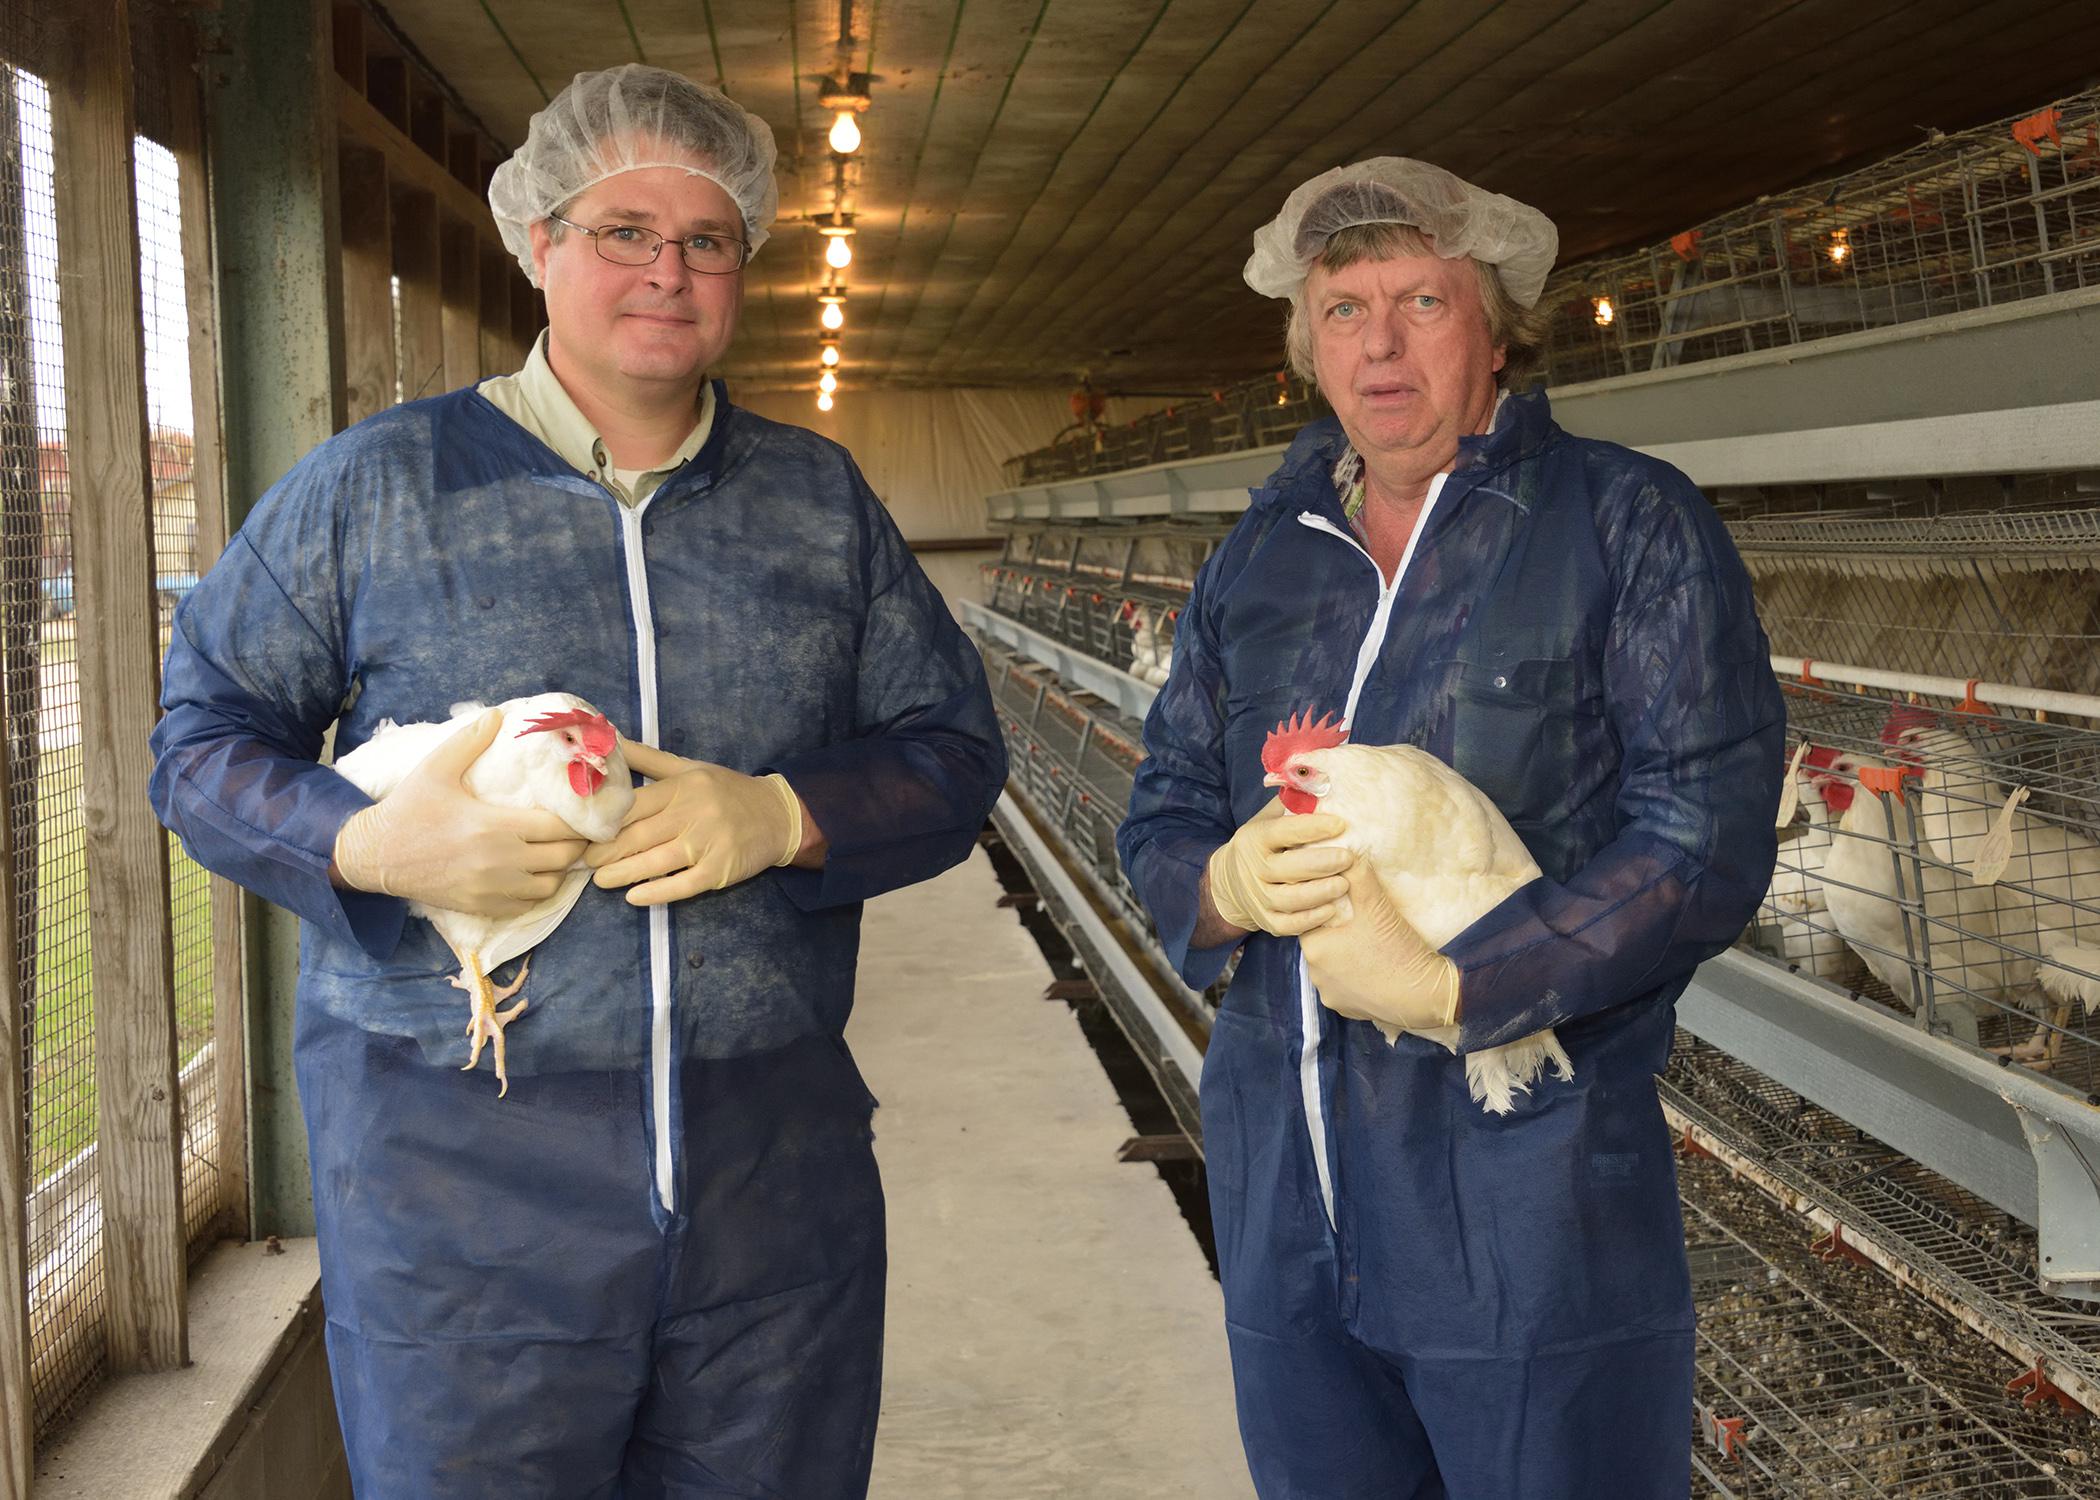 Mississippi State University Extension Service poultry specialists Morgan Farnell (left) and Tom Tabler are working with representatives from the Mississippi Department of Health to improve conditions at the Mississippi Department of Corrections poultry facility in Parchman, Mississippi. (MSU Ag Communication 2014 file photo)